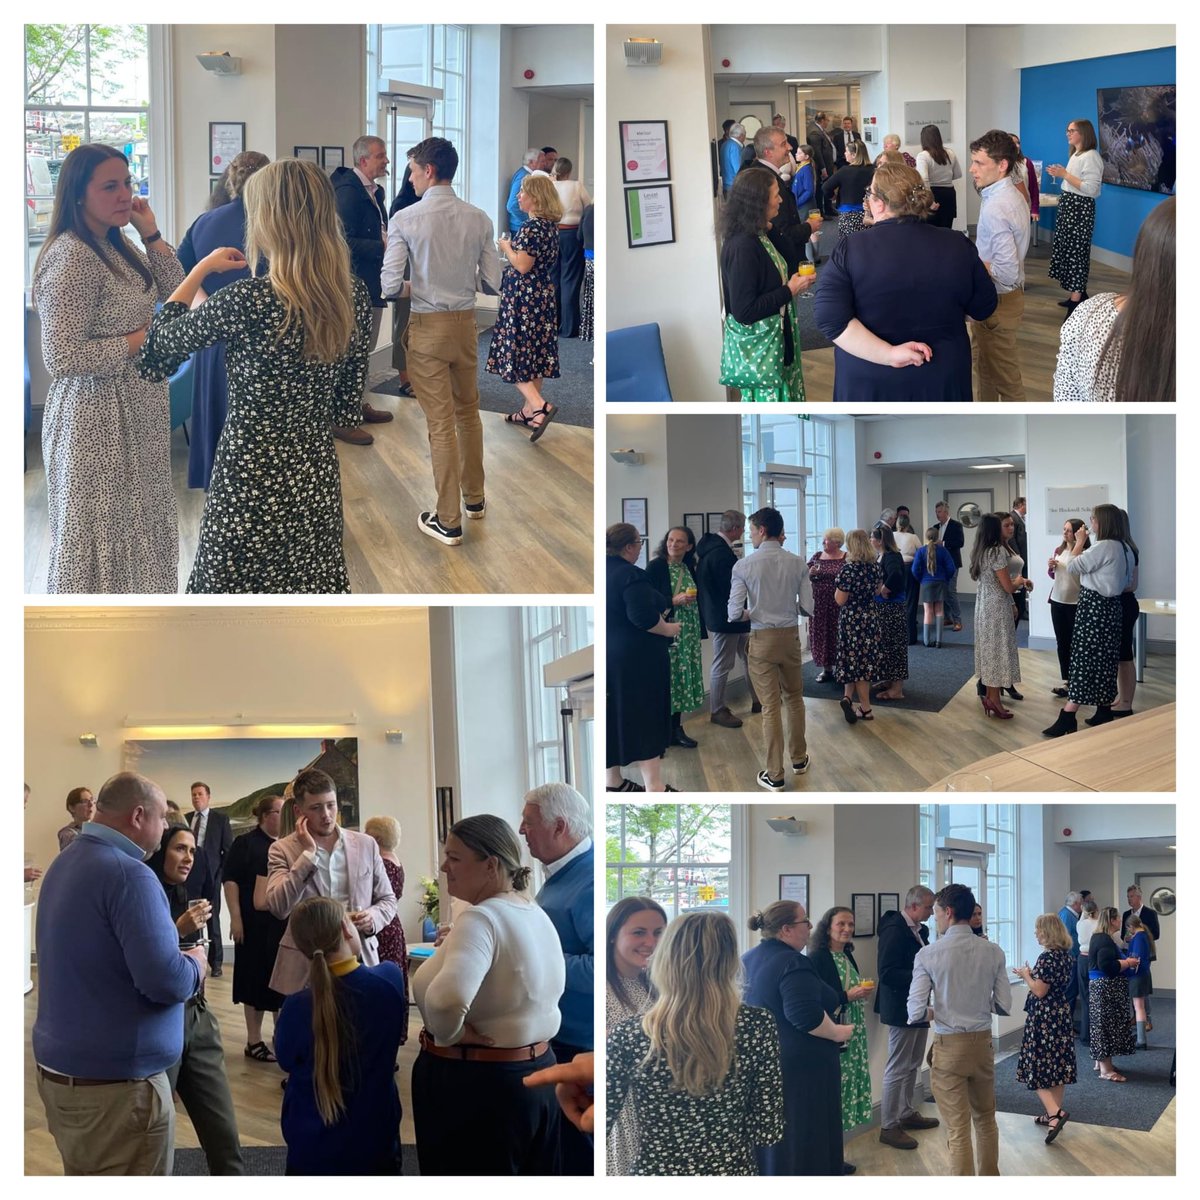 We were thrilled to welcome local businesses to our new office in #Bideford last night! Thank you to everyone who joined us for the celebration. Your support means the world to us as we embark on this exciting new chapter. Here’s to many more successful partnerships ahead!